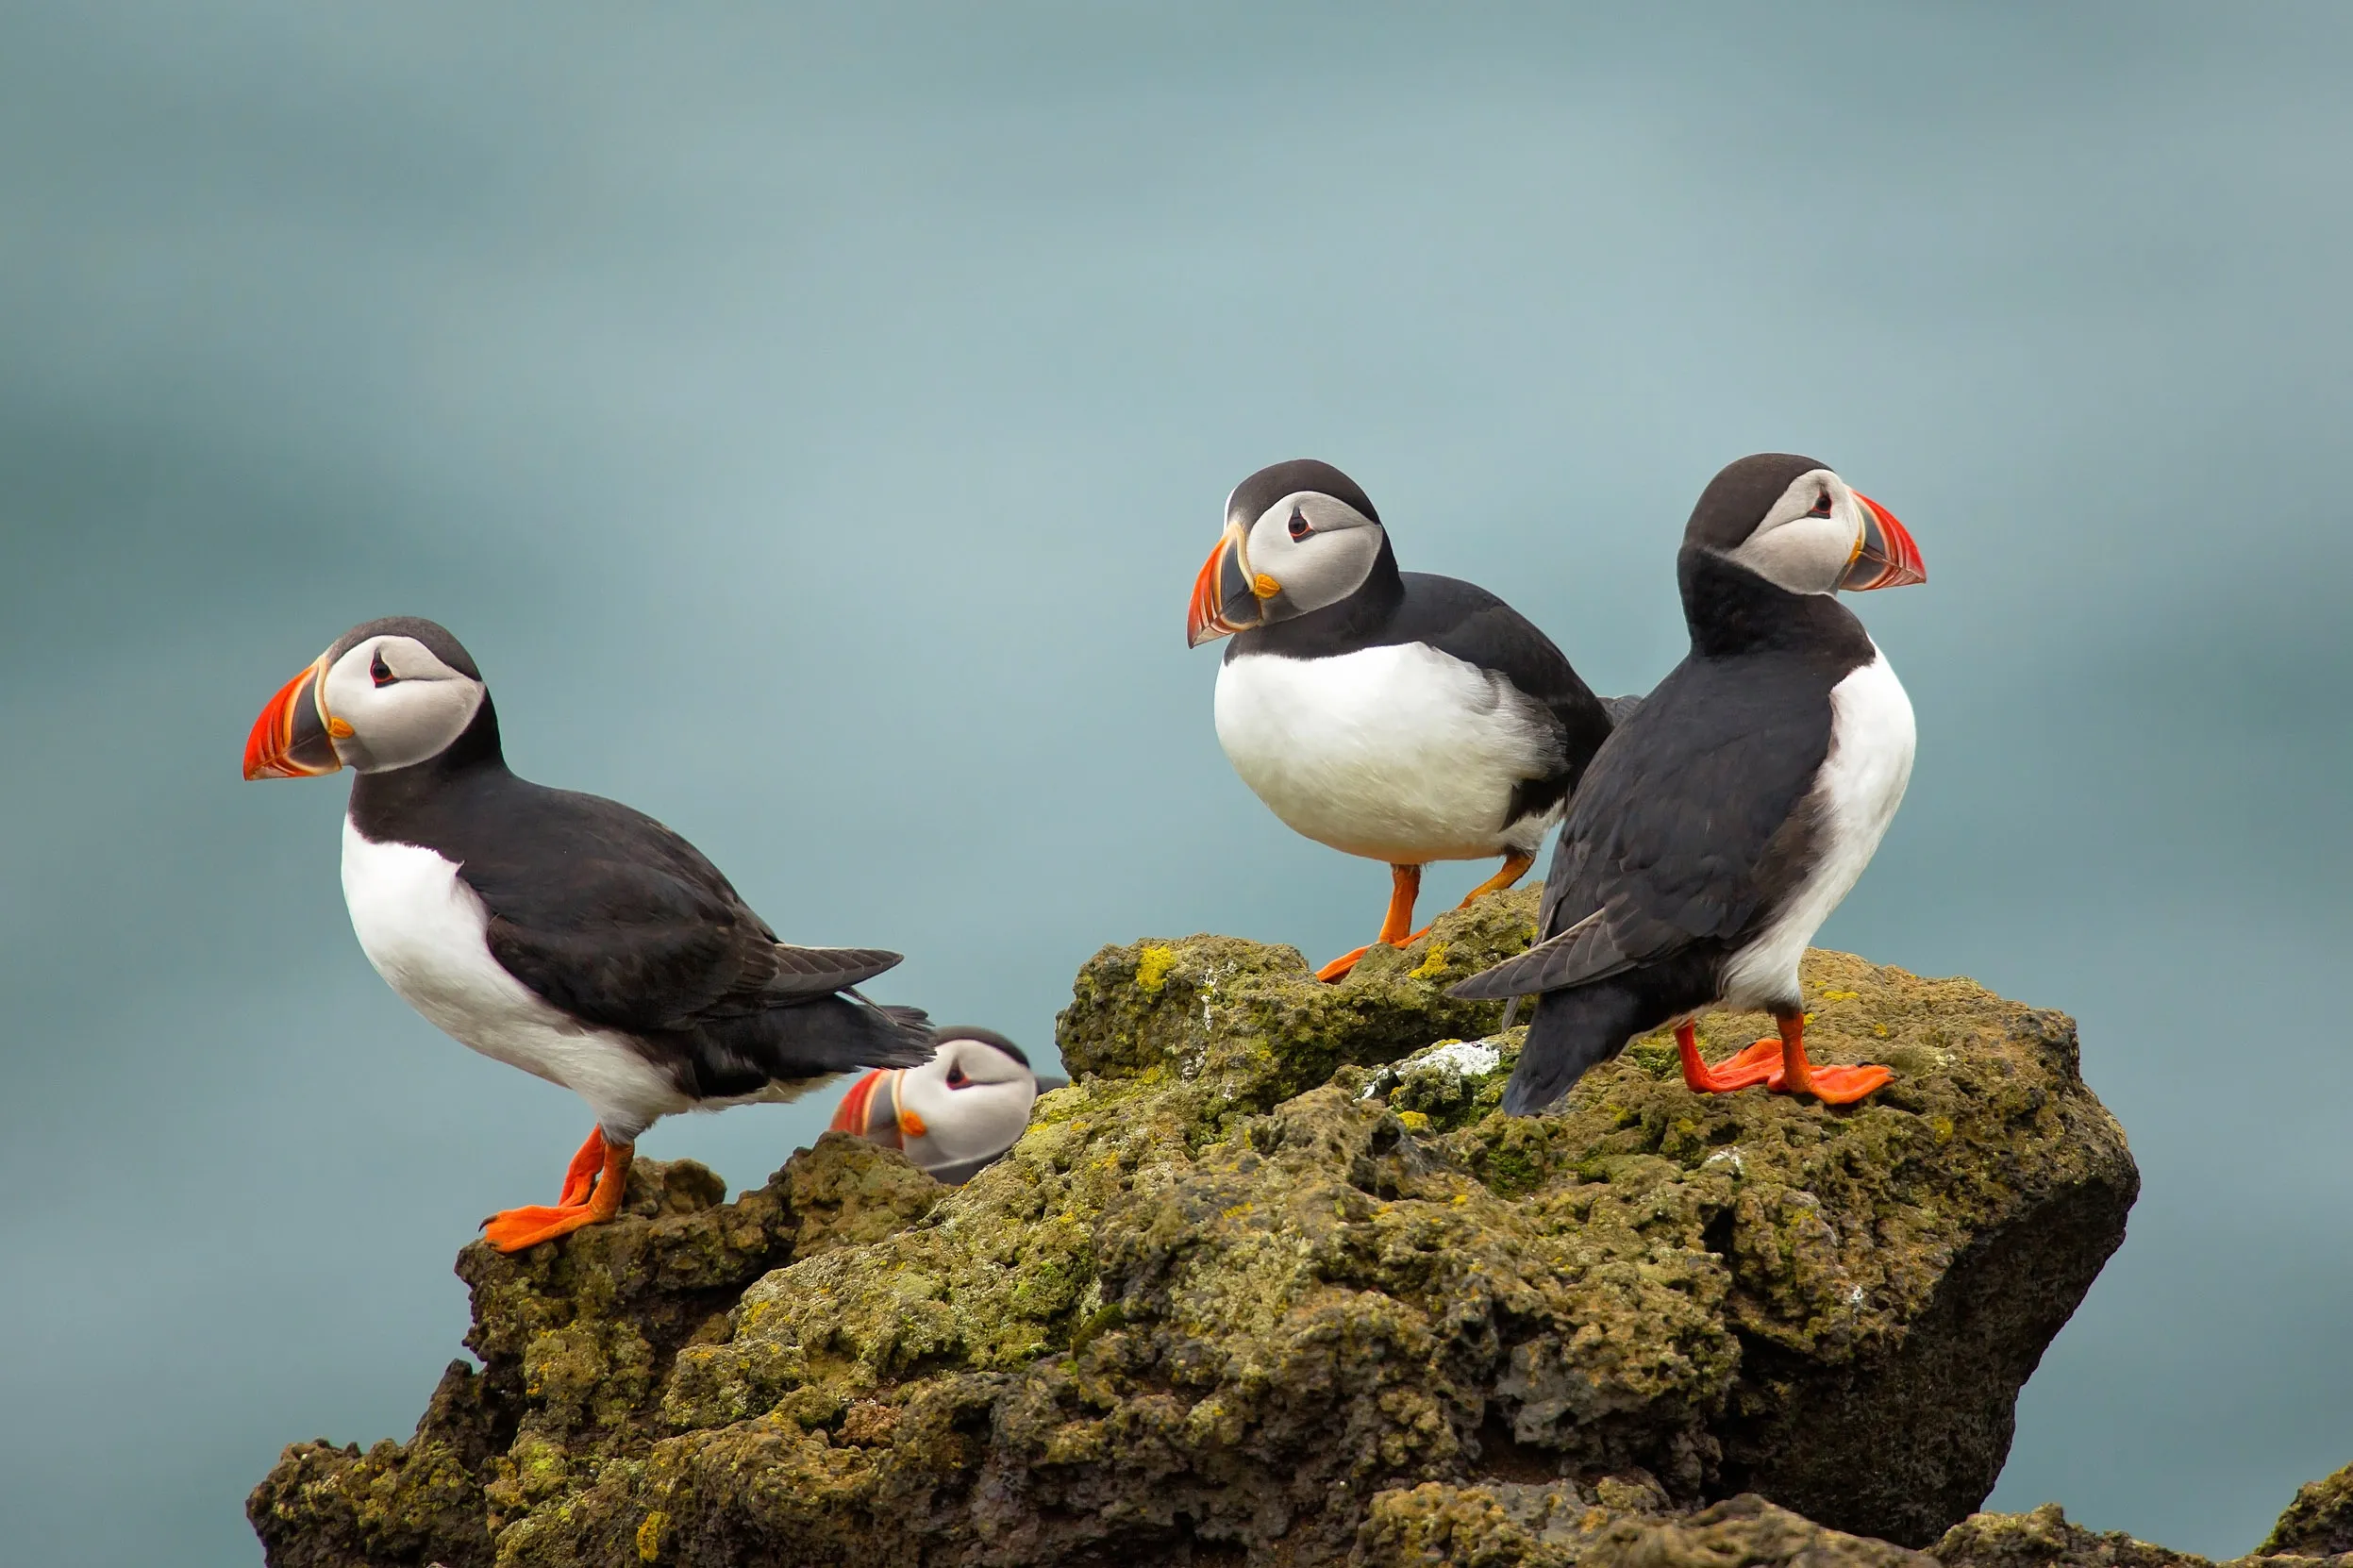 A group of four puffins perched on a rock.